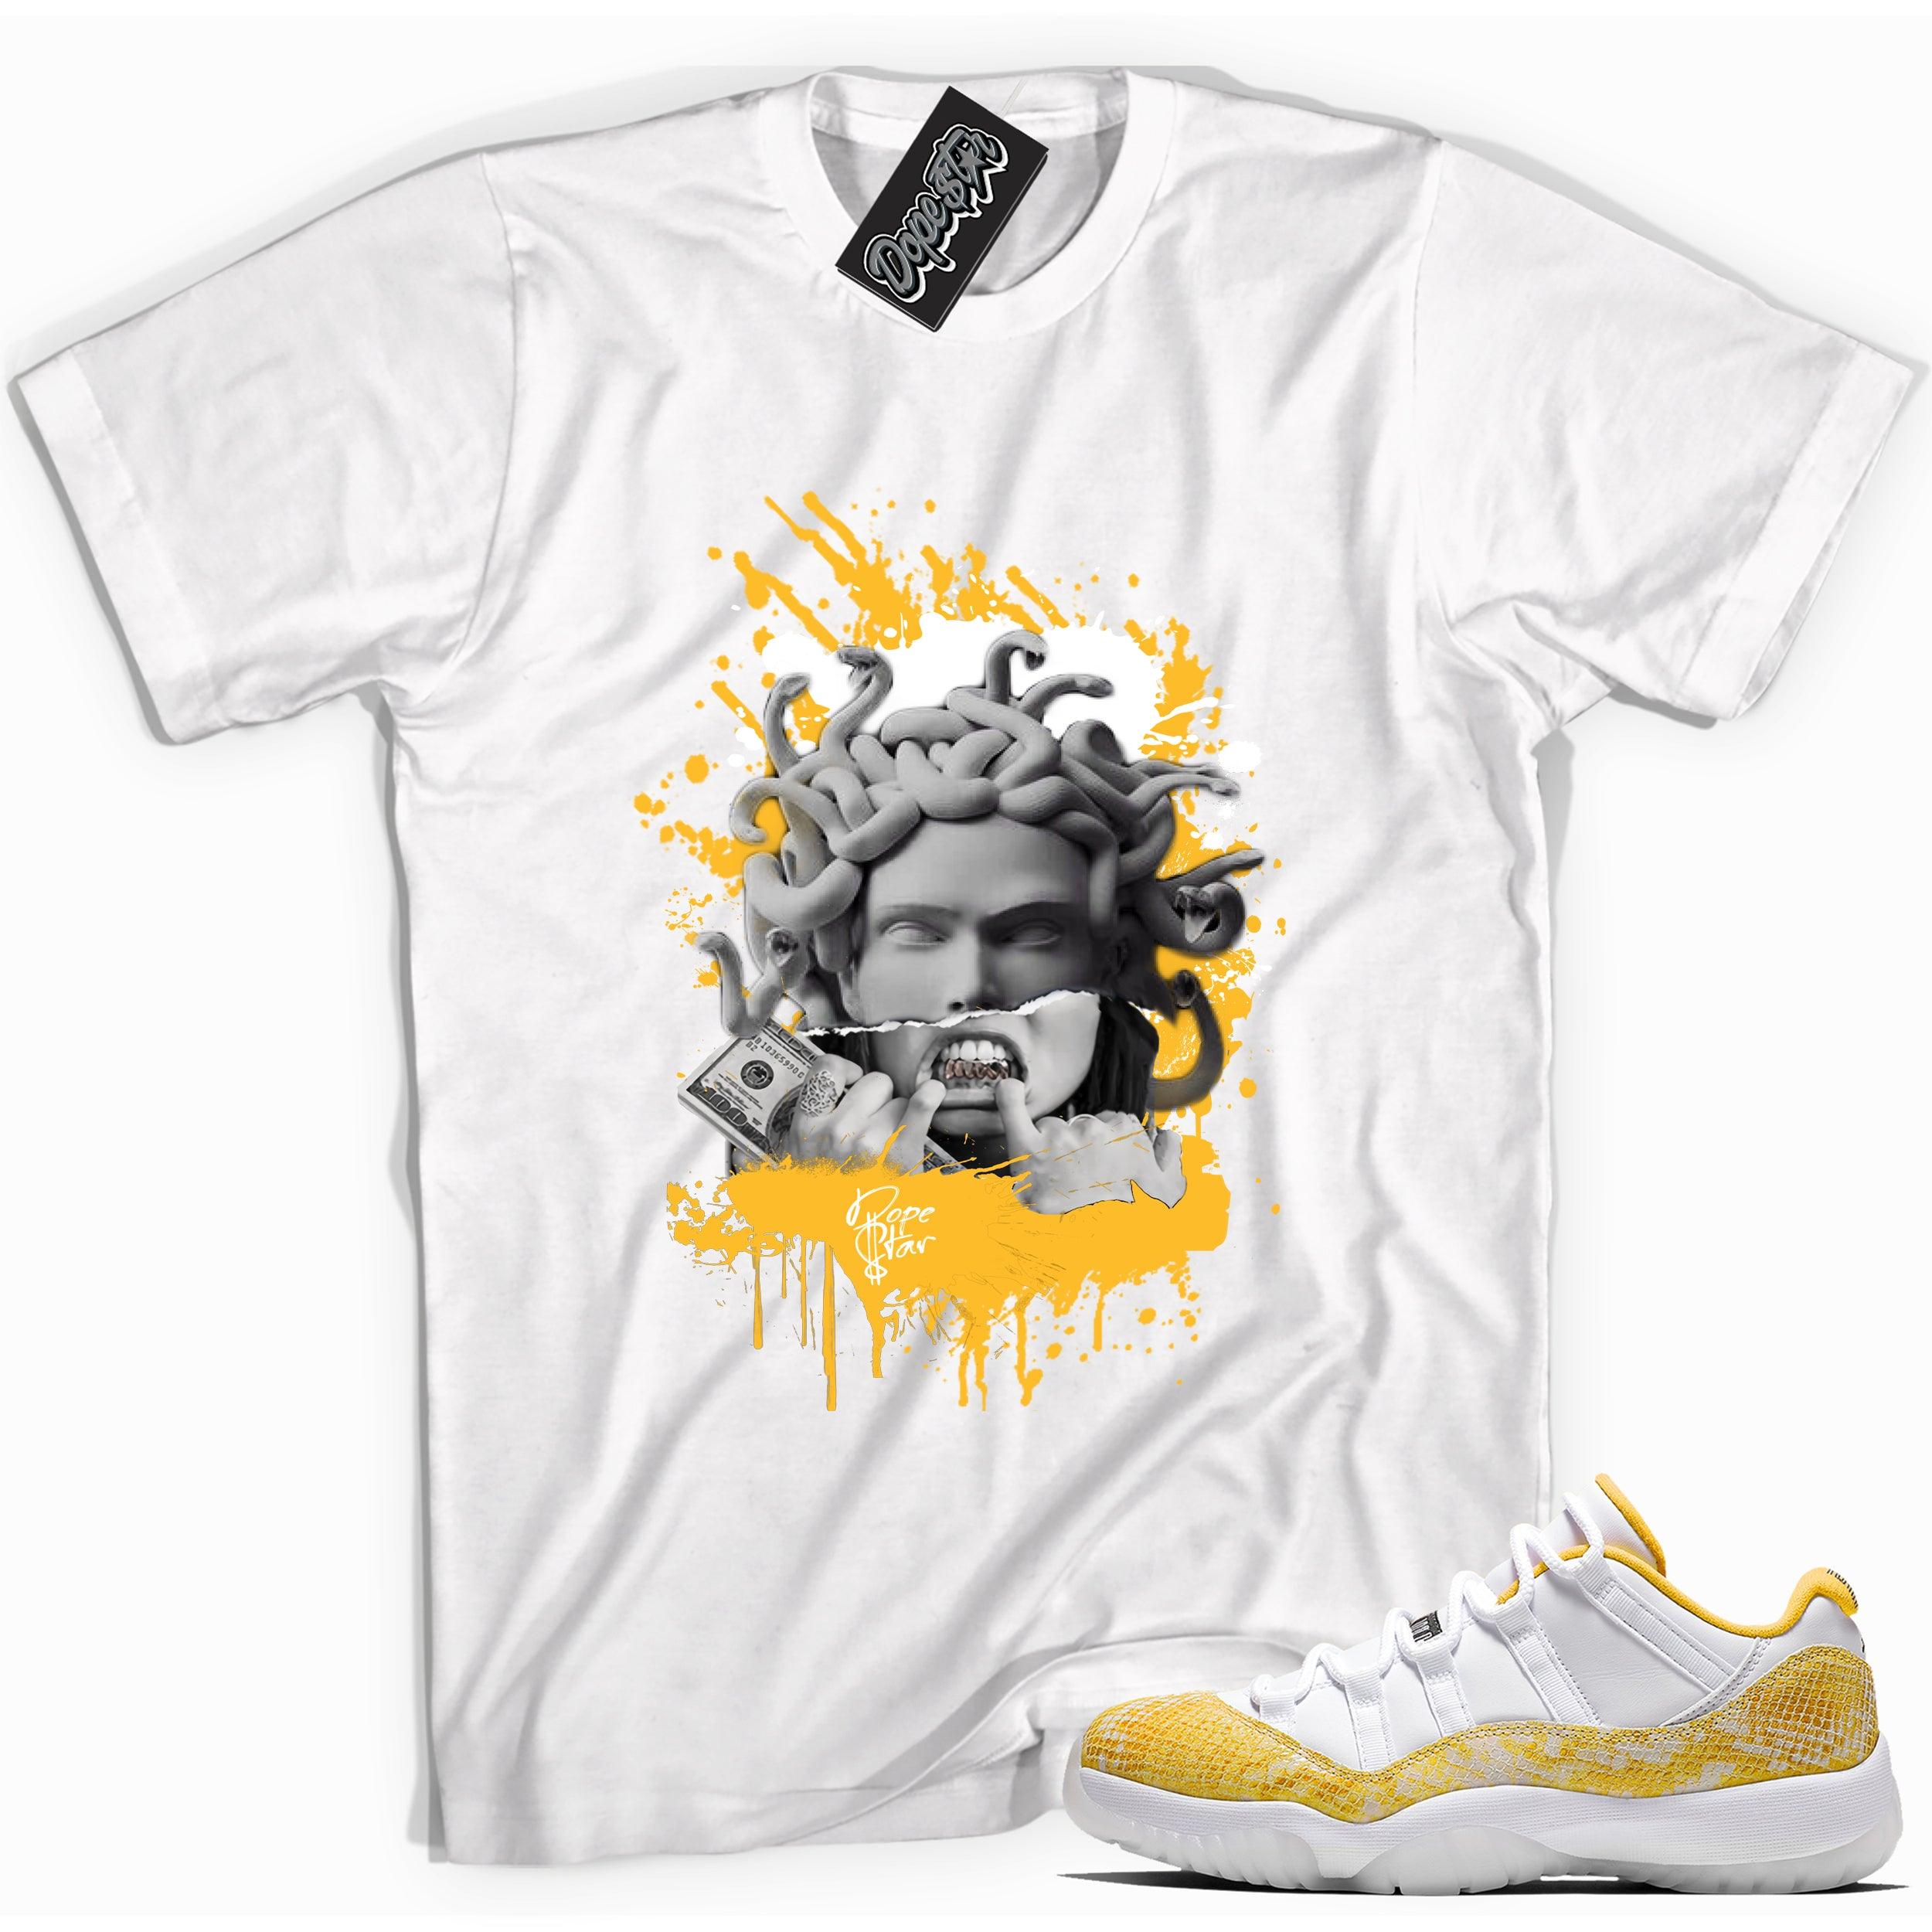 Cool white graphic tee with 'medusa' print, that perfectly matches Air Jordan 11 Retro Low Yellow Snakeskin sneakers